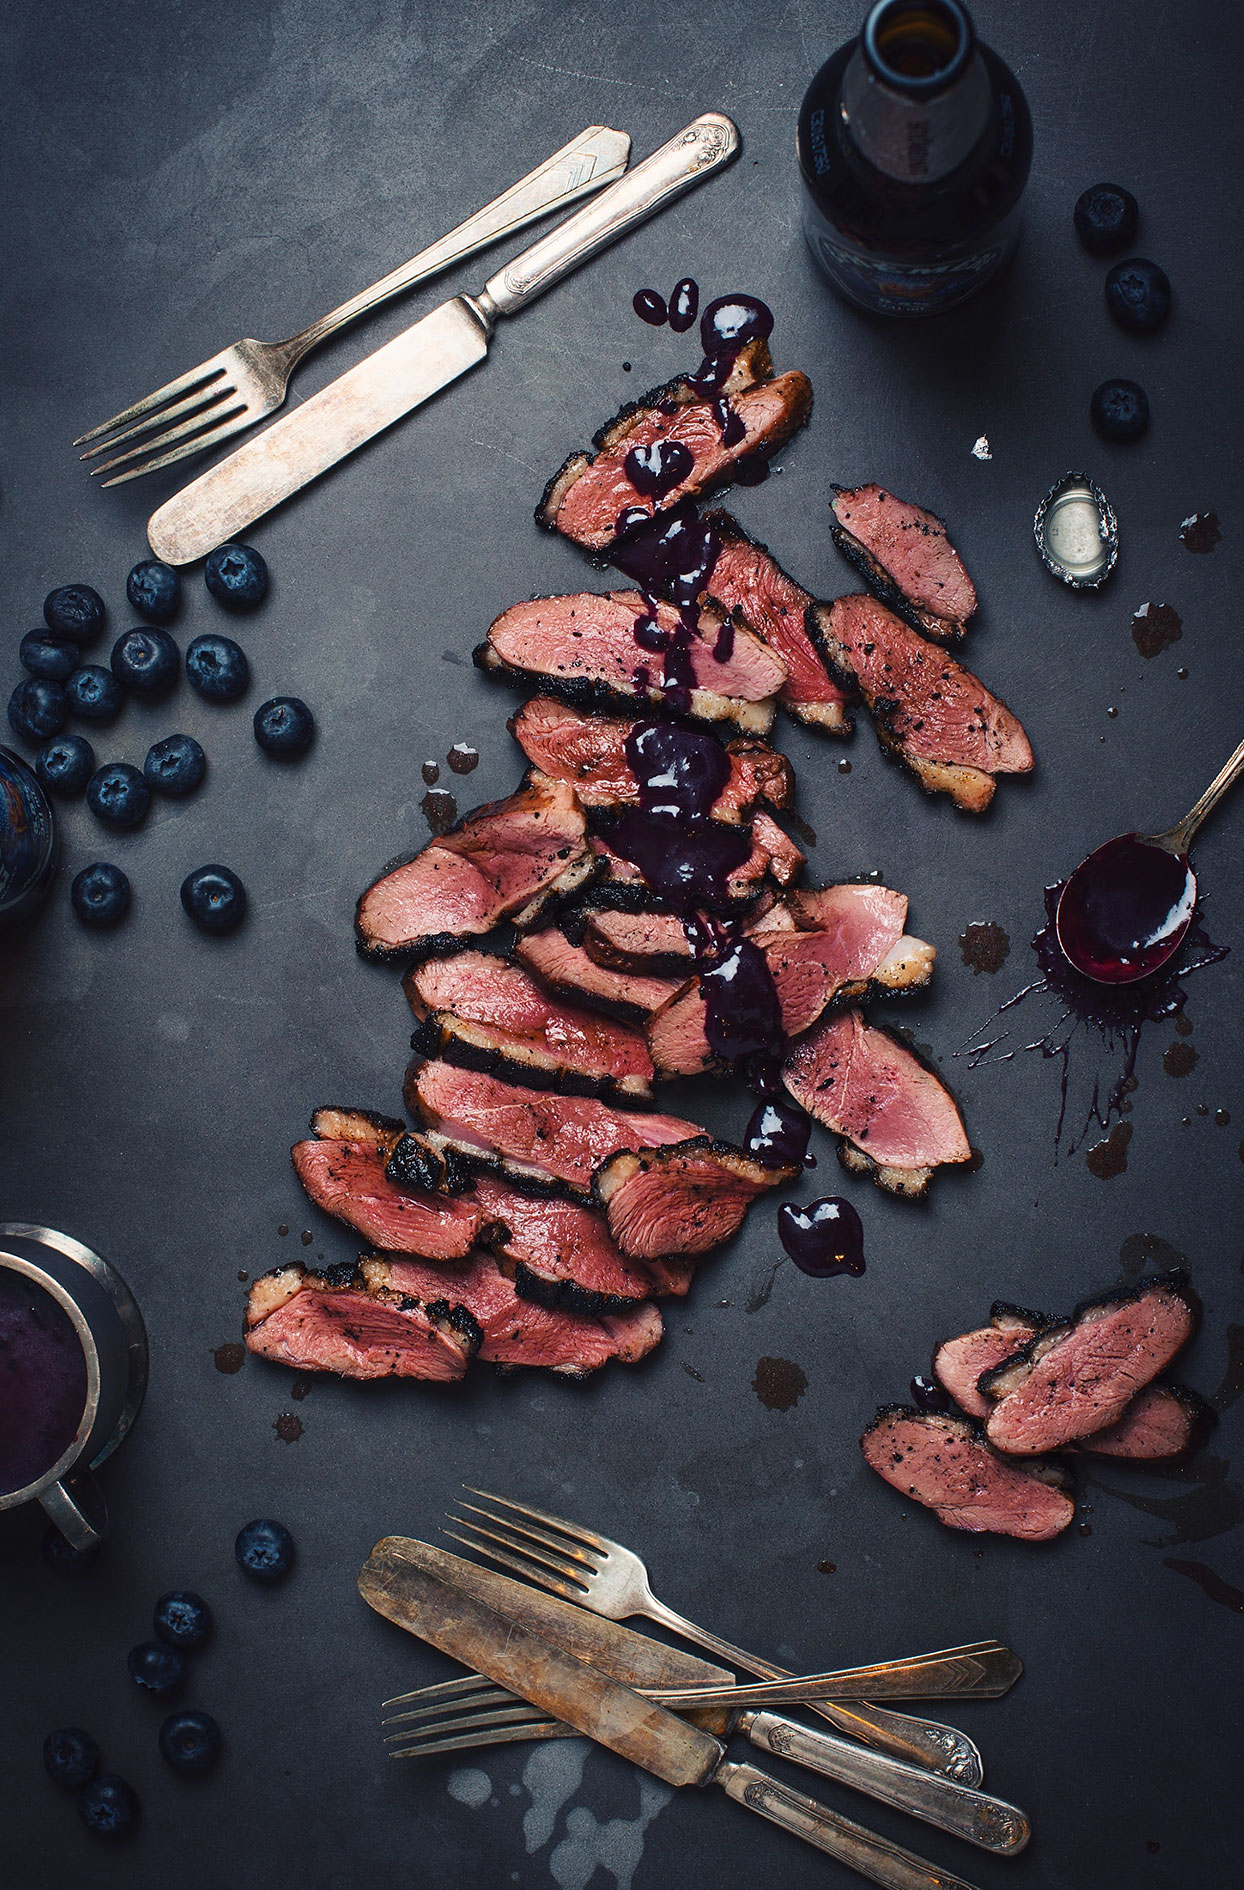 Barbecued duck breasts with blueberry sauce